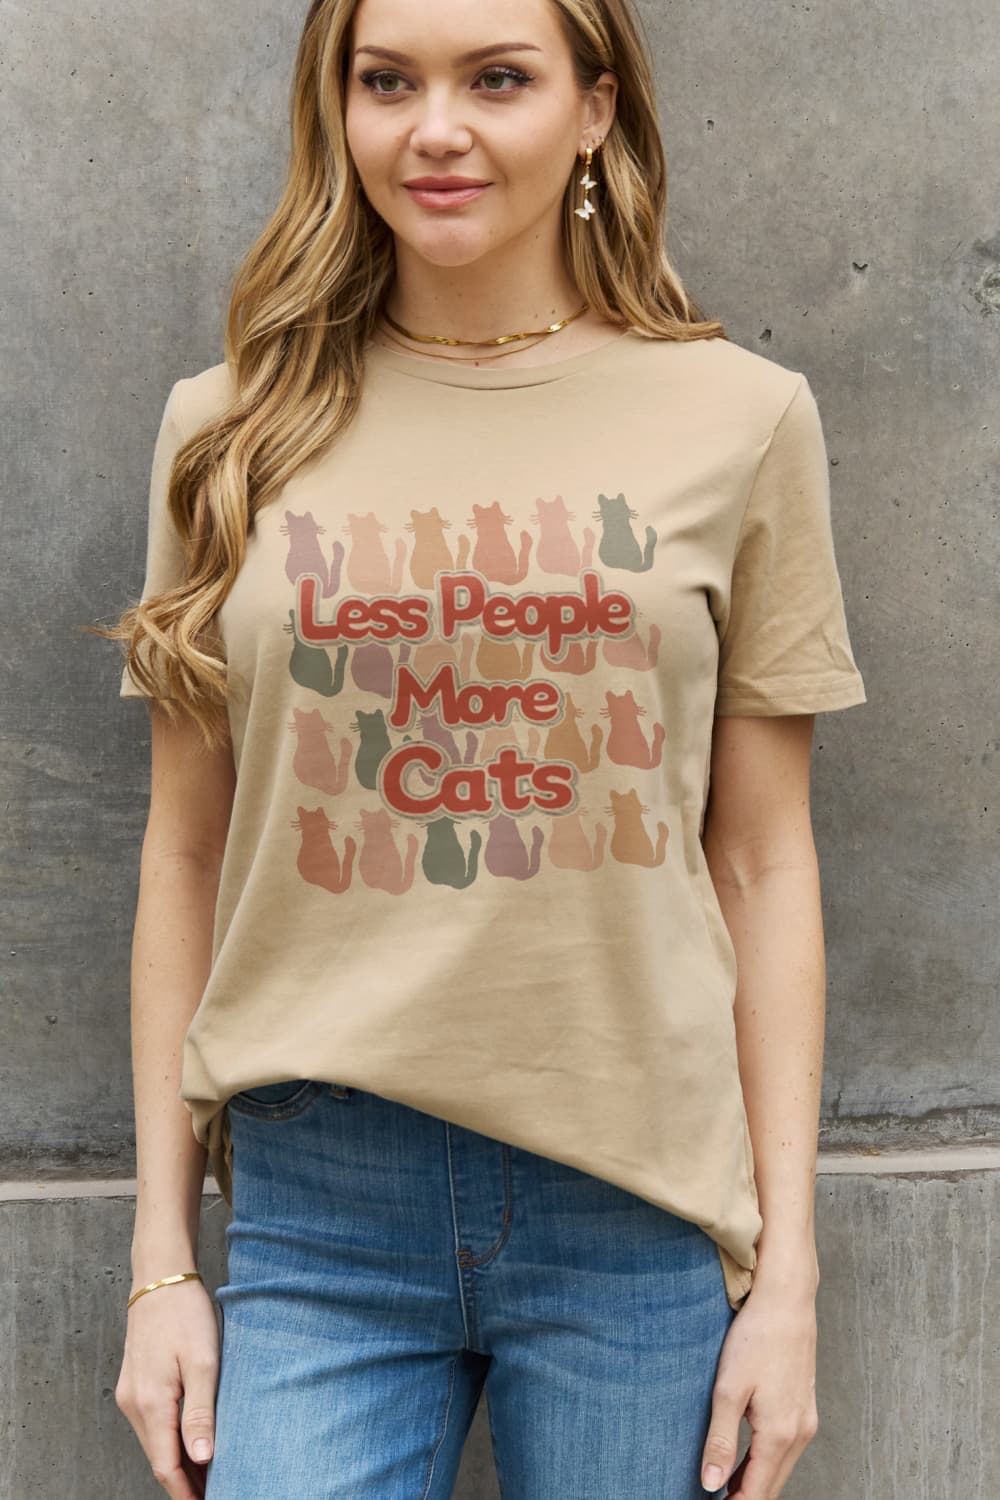 LESS PEOPLE MORE CATS Graphic Cotton Tee - T-Shirts - Shirts & Tops - 8 - 2024